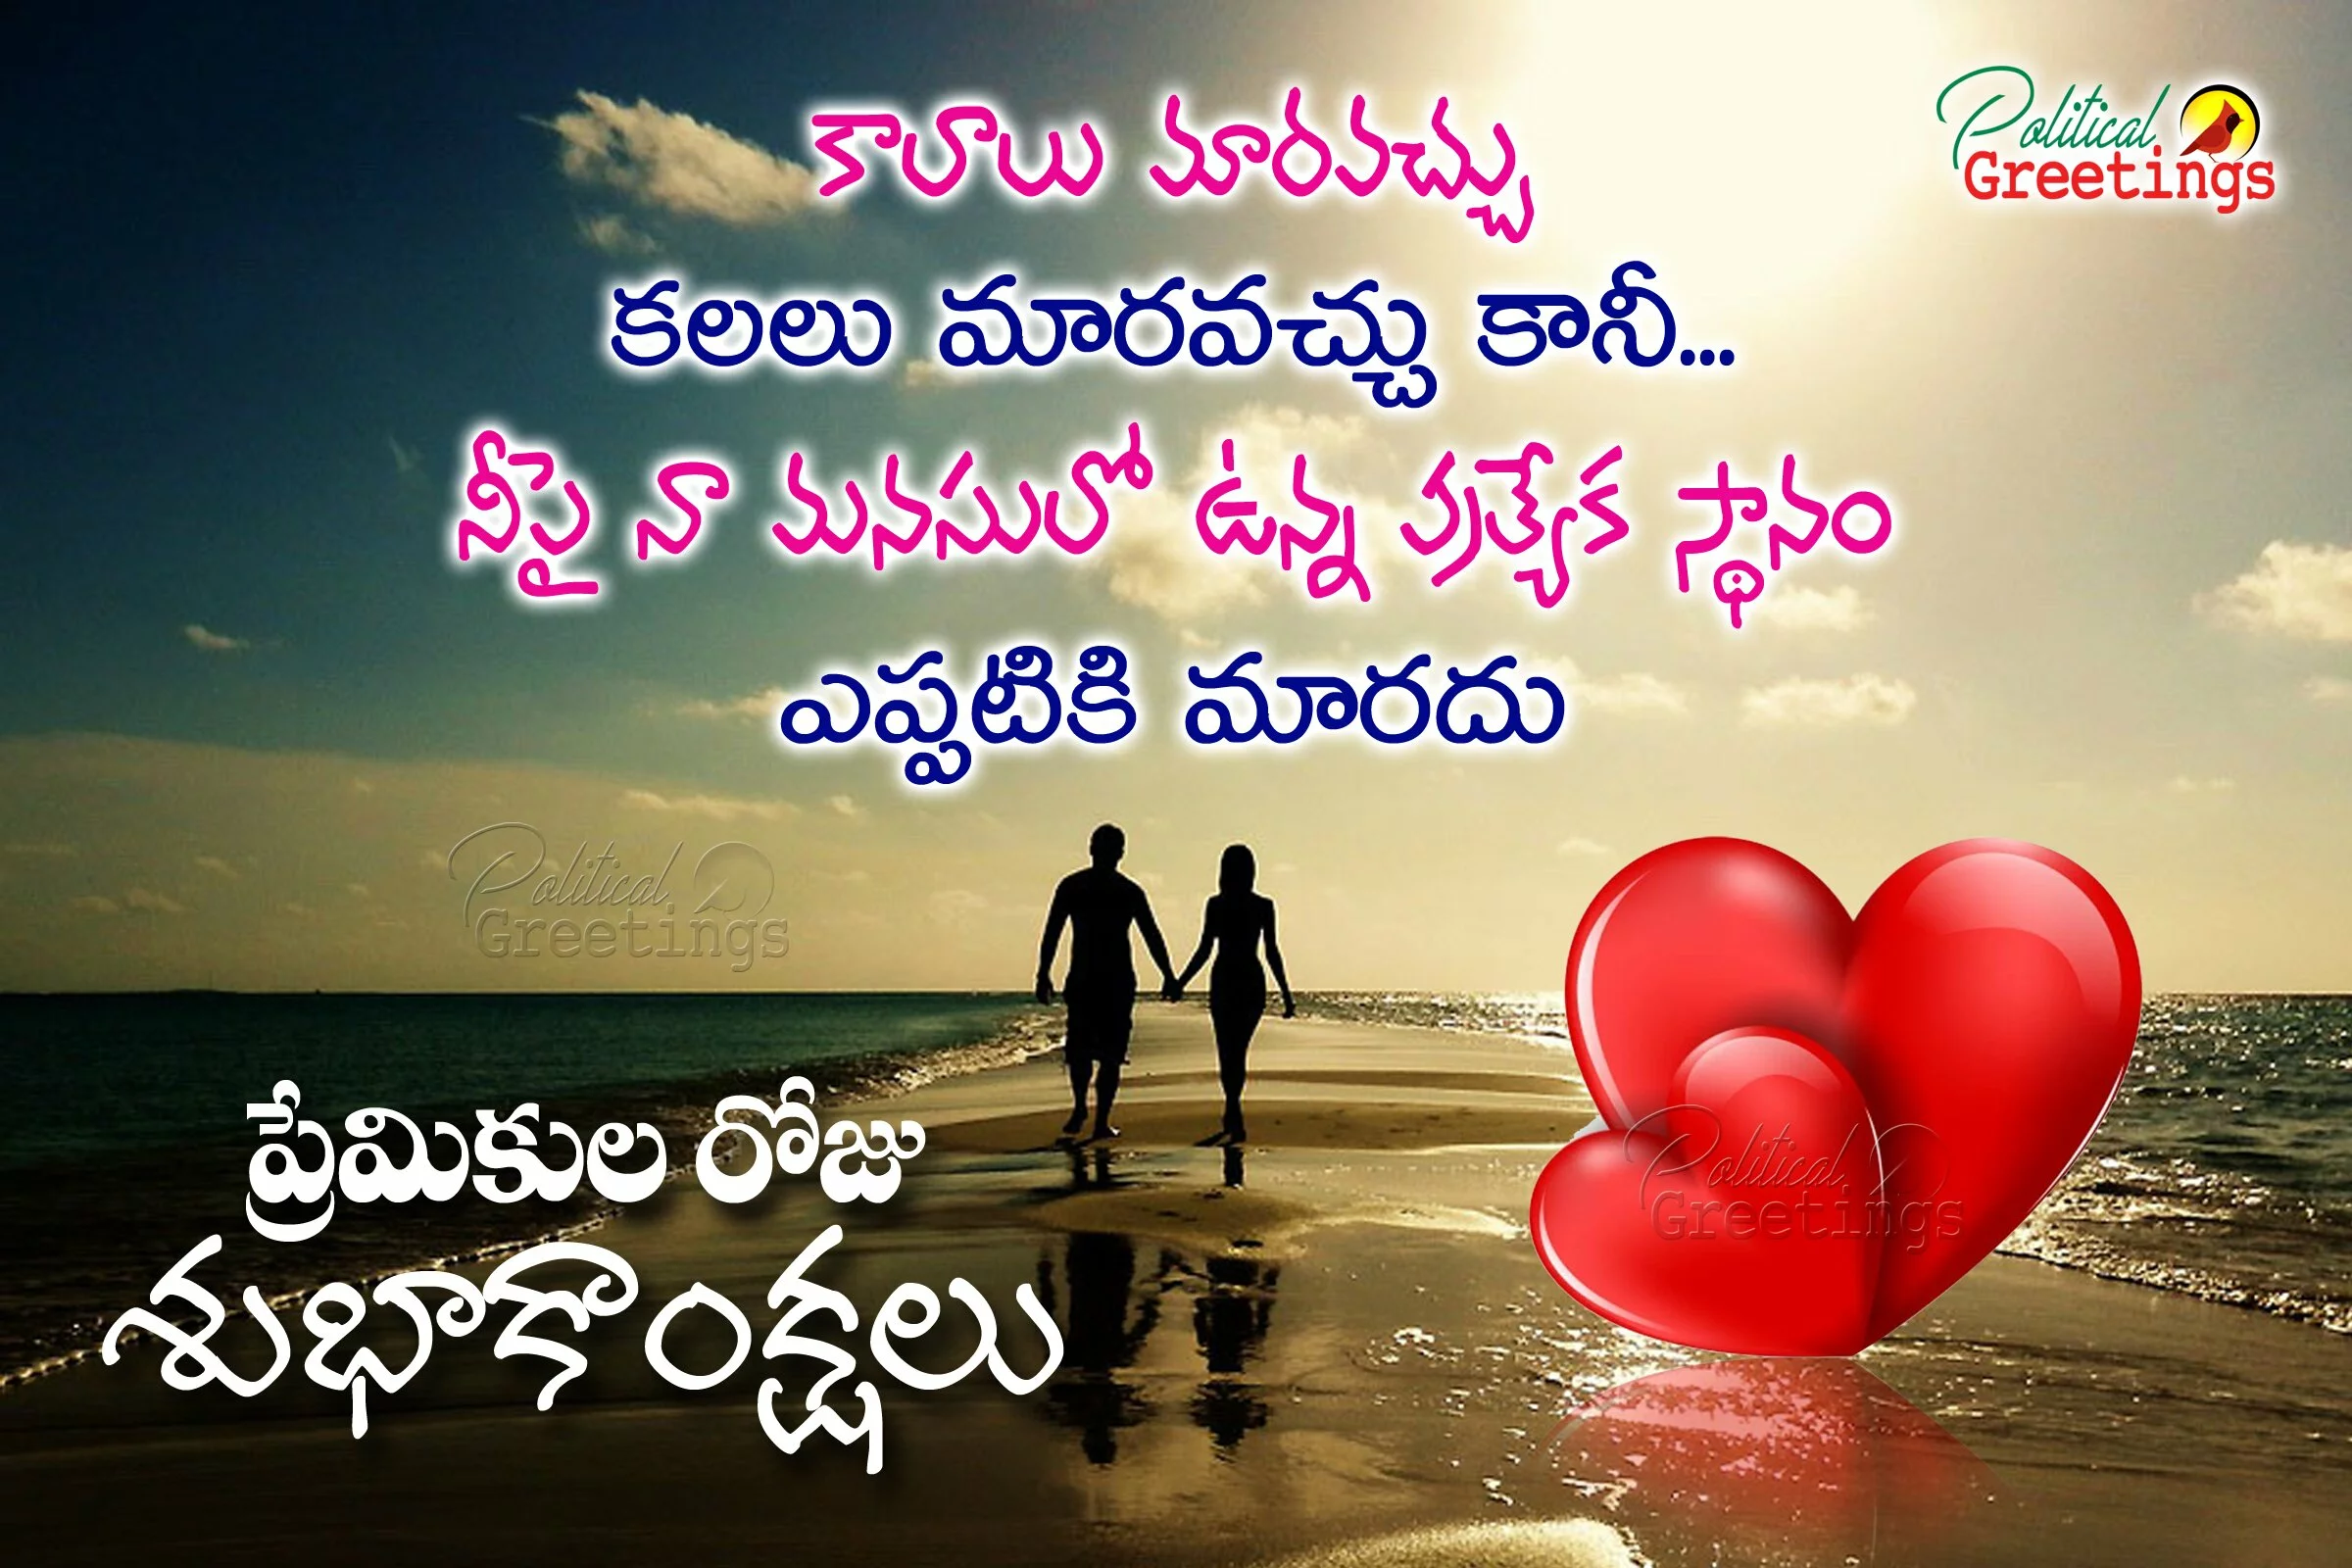 happy-valentines-day-quotes-greetings-wishes-hd-wallpapers-politicalgreetings